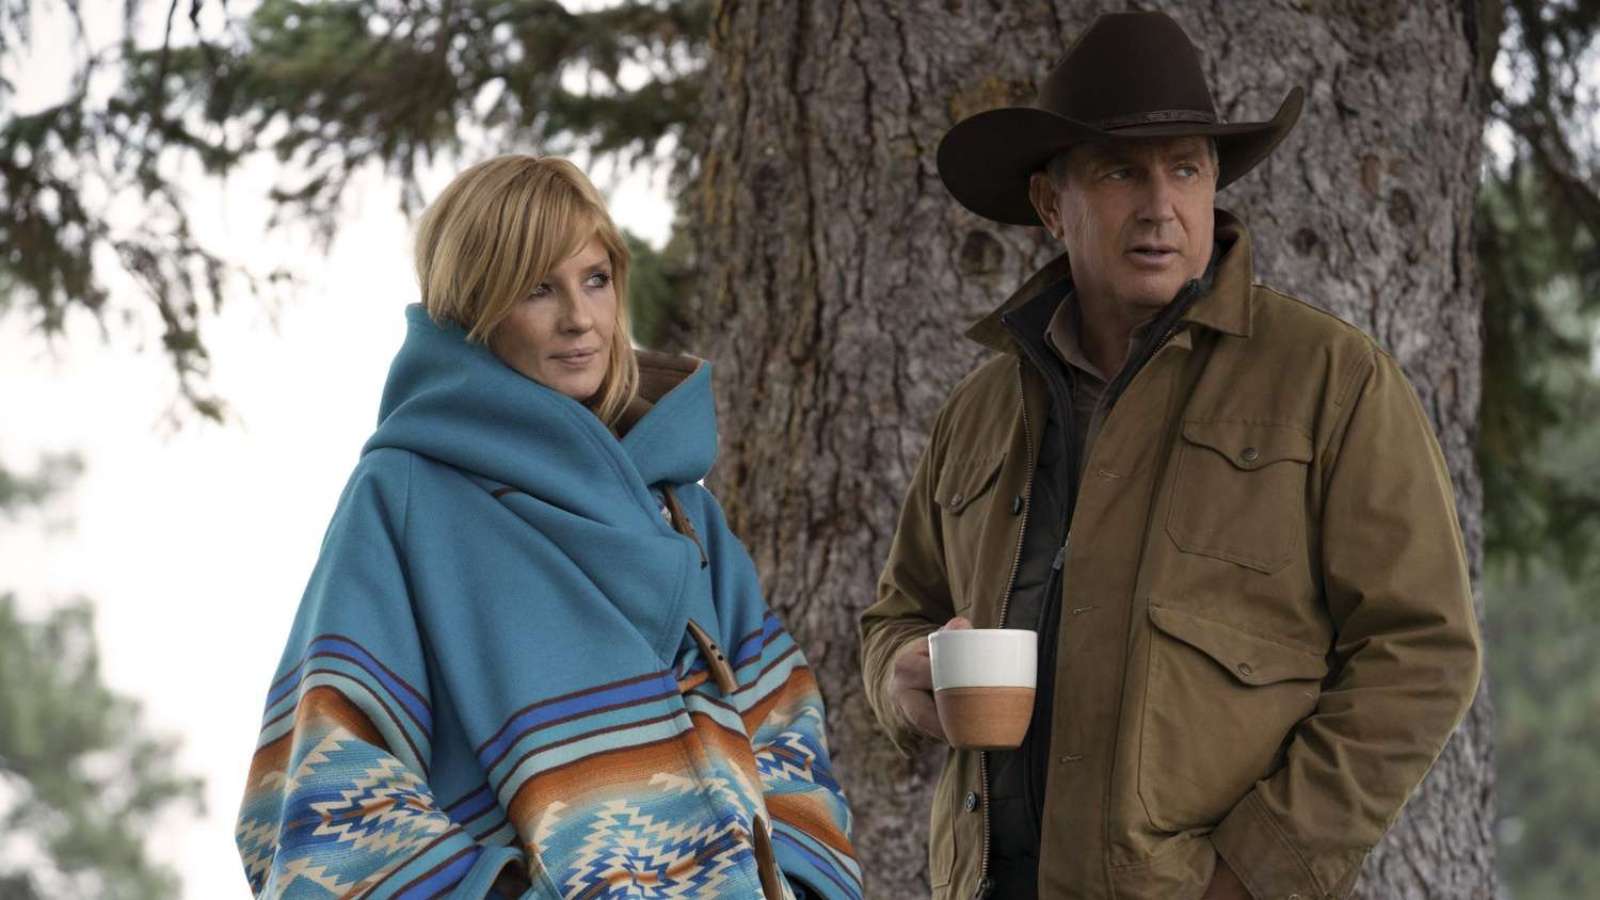 Kelly Reilly and Kevin Costner in Yellowstone as Beth and John